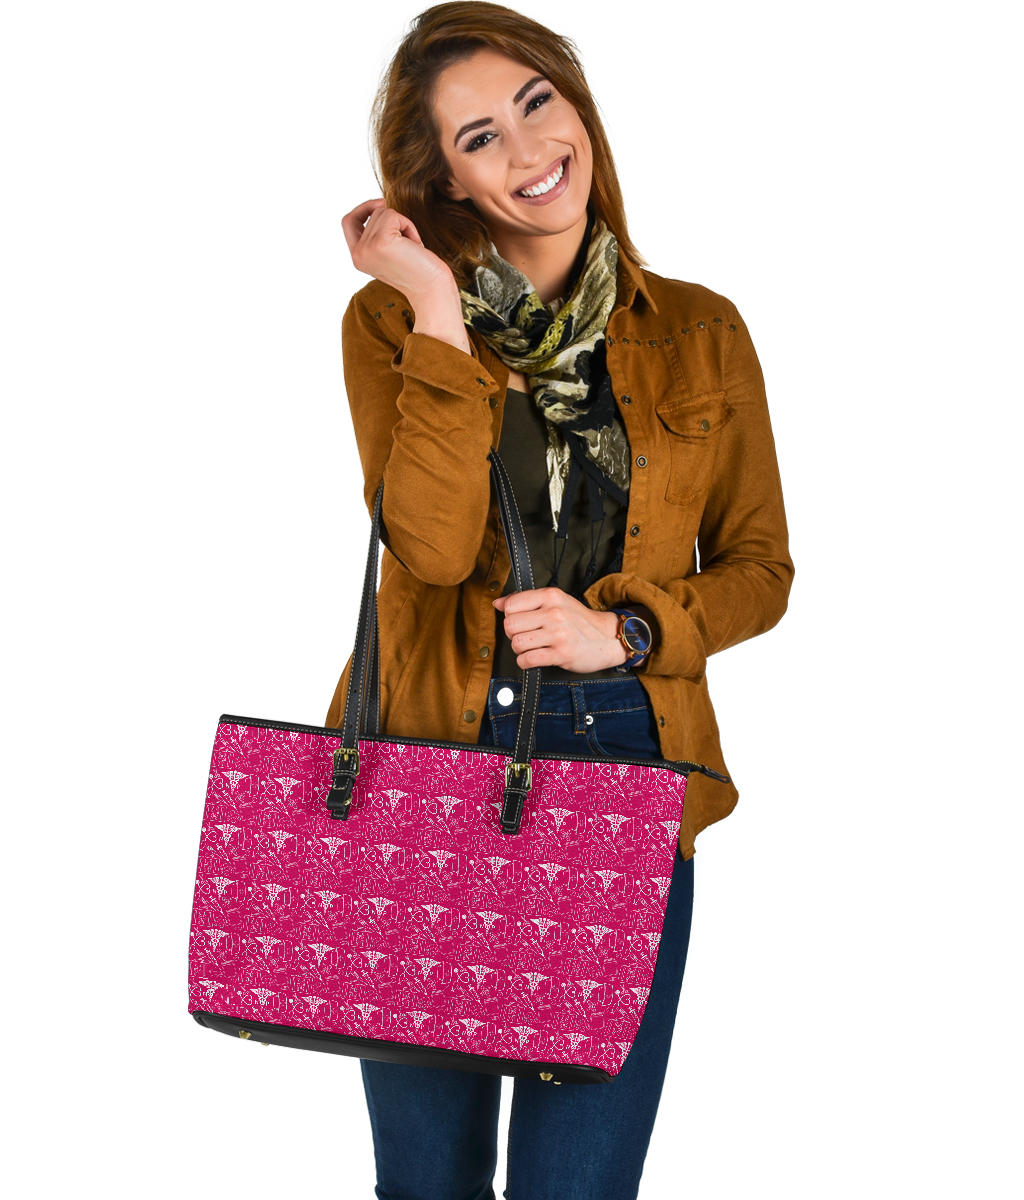 Nurse Practitioner (NP) Large Pink PU Faux Leather Tote Bag